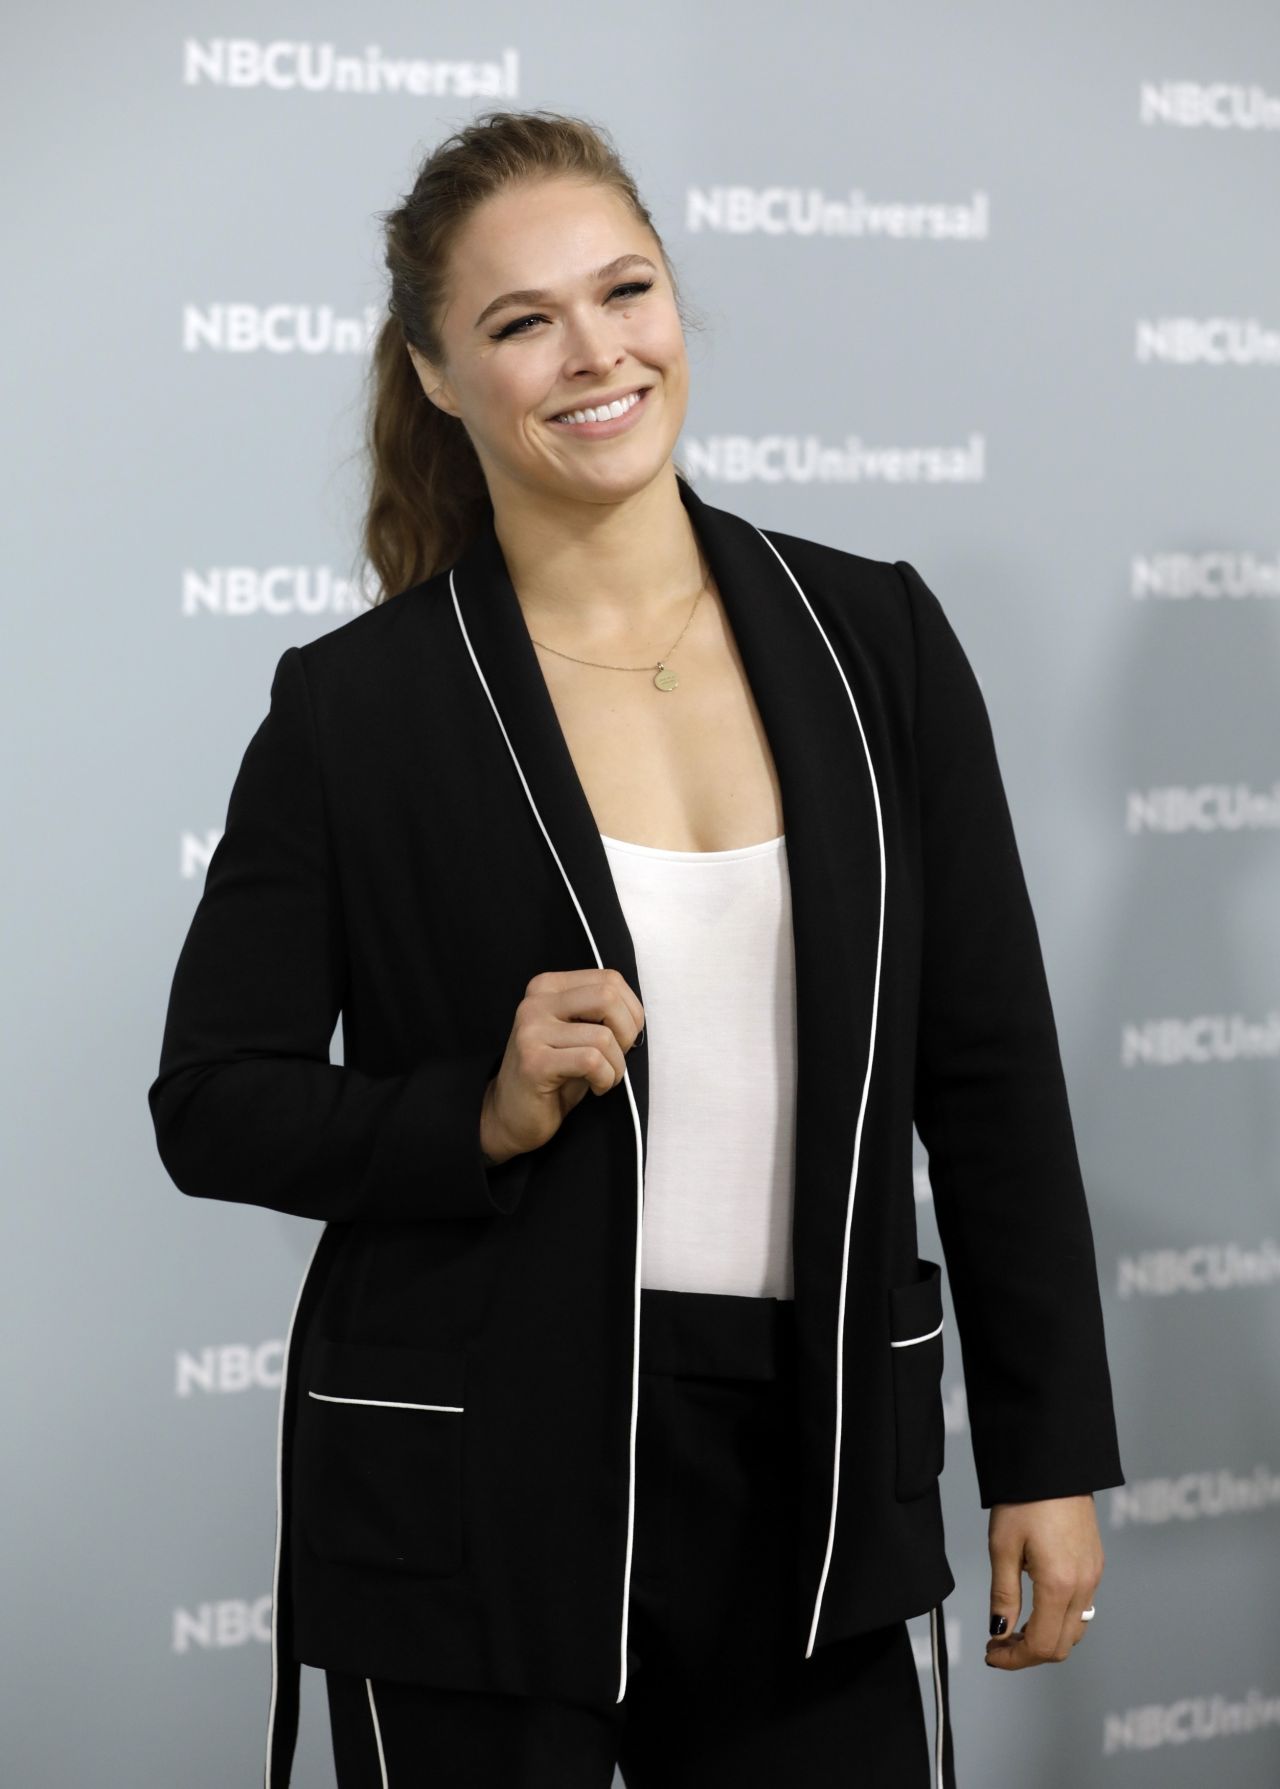 https://celebmafia.com/wp-content/uploads/2018/05/ronda-rousey-2018-nbcuniversal-upfront-in-nyc-2.jpg